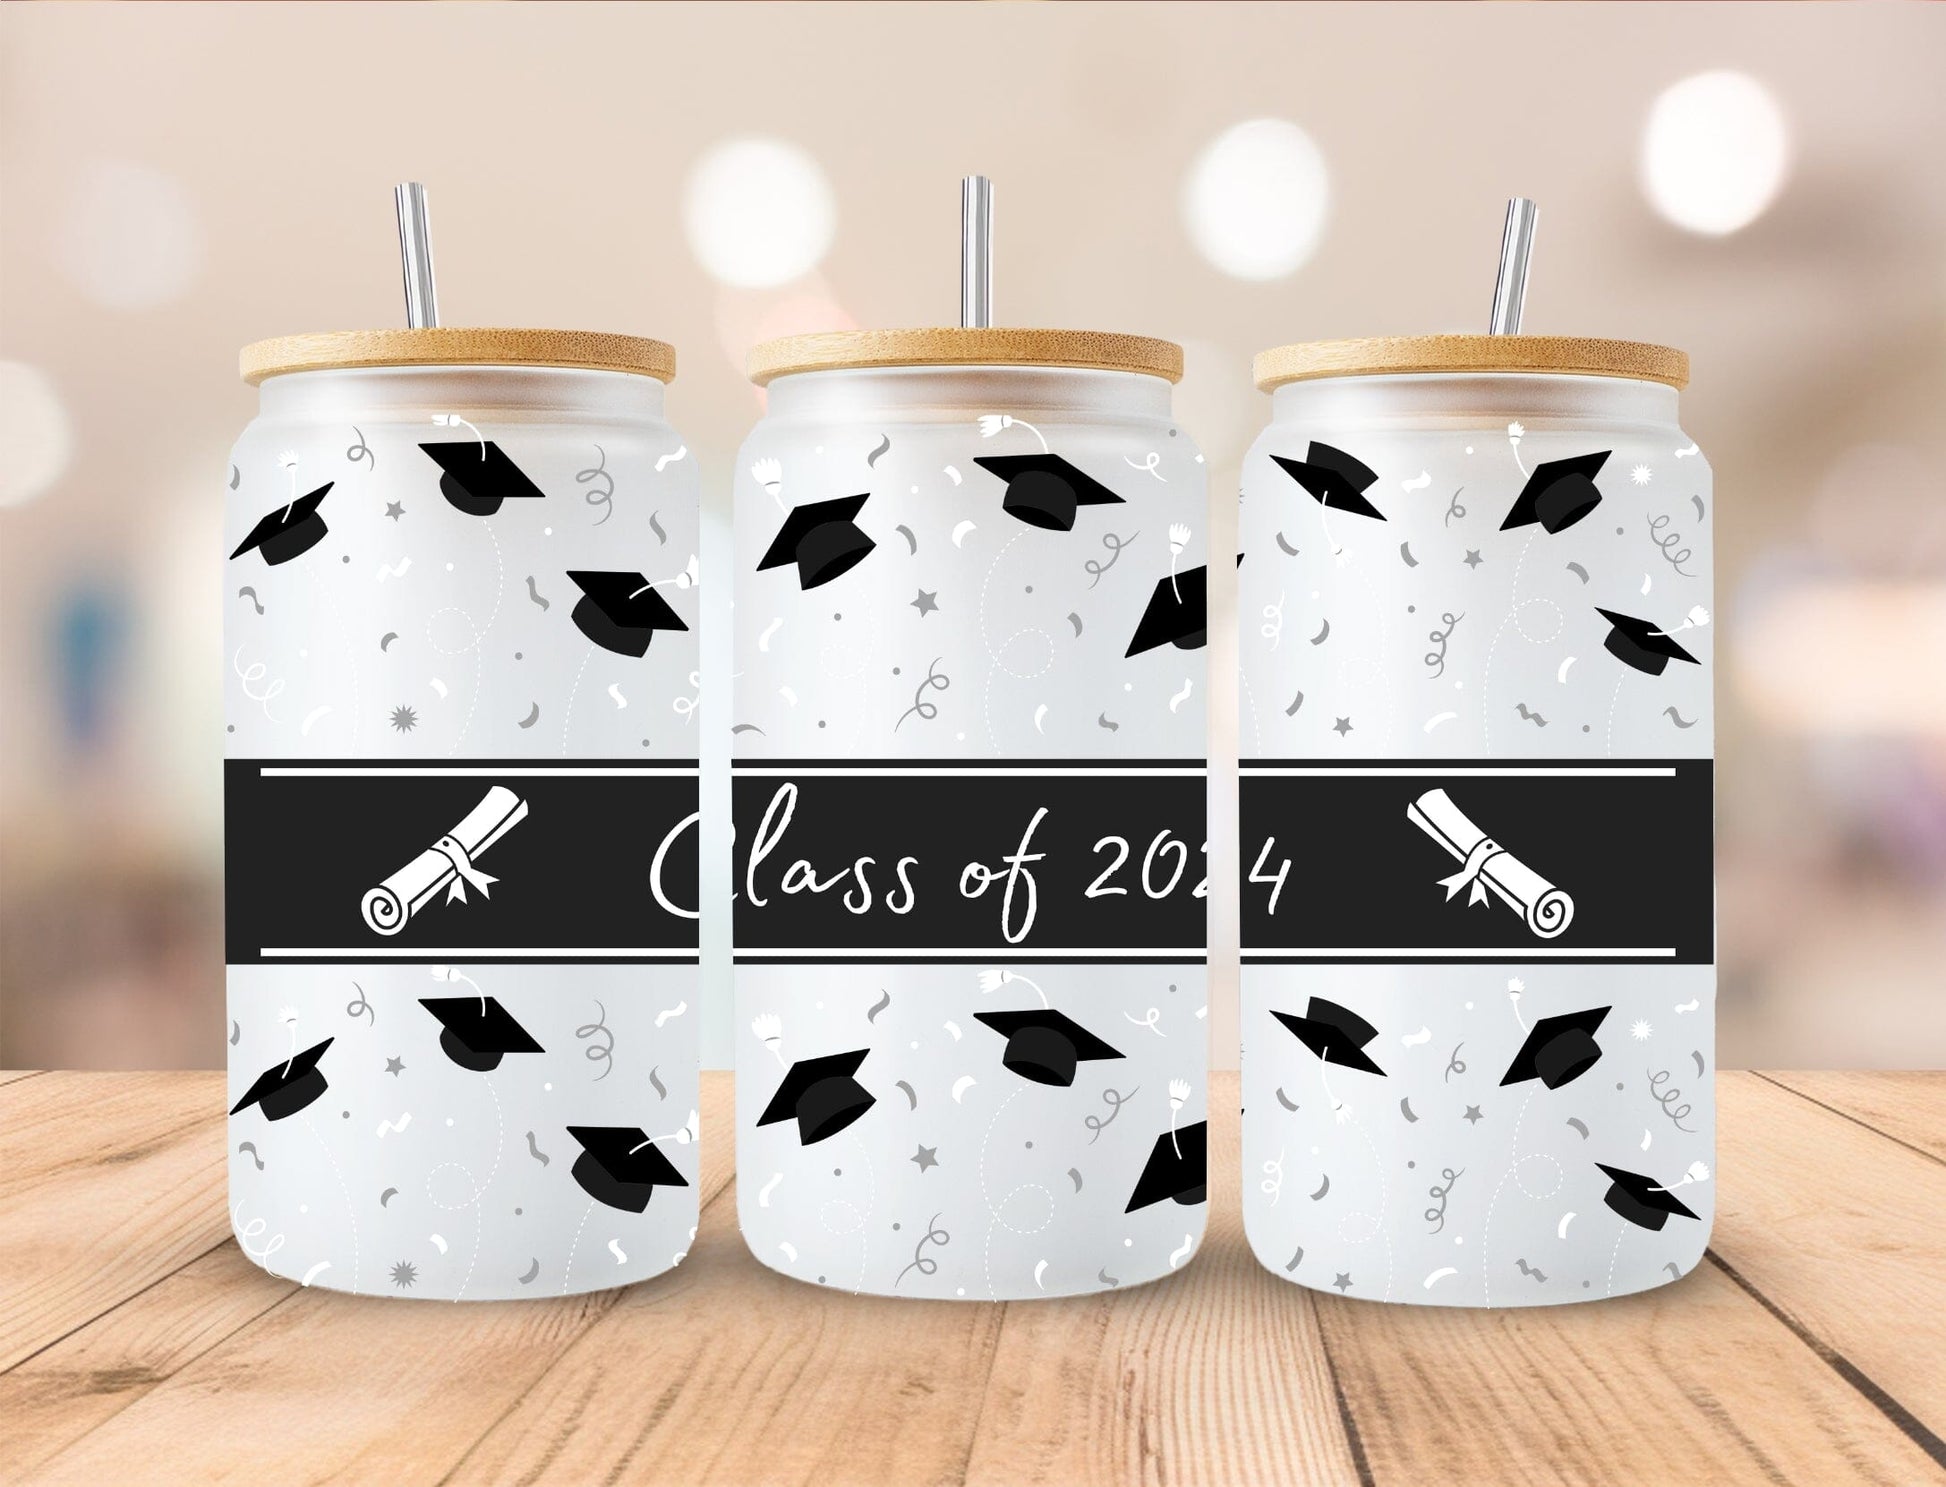 Class of 2024 - Senior - Graduation - 16oz Frosted Glass with Bamboo Lid Cup - 2 Designs to Choose From 16oz Glass Tumbler Graphic Avenue Class of 2024 